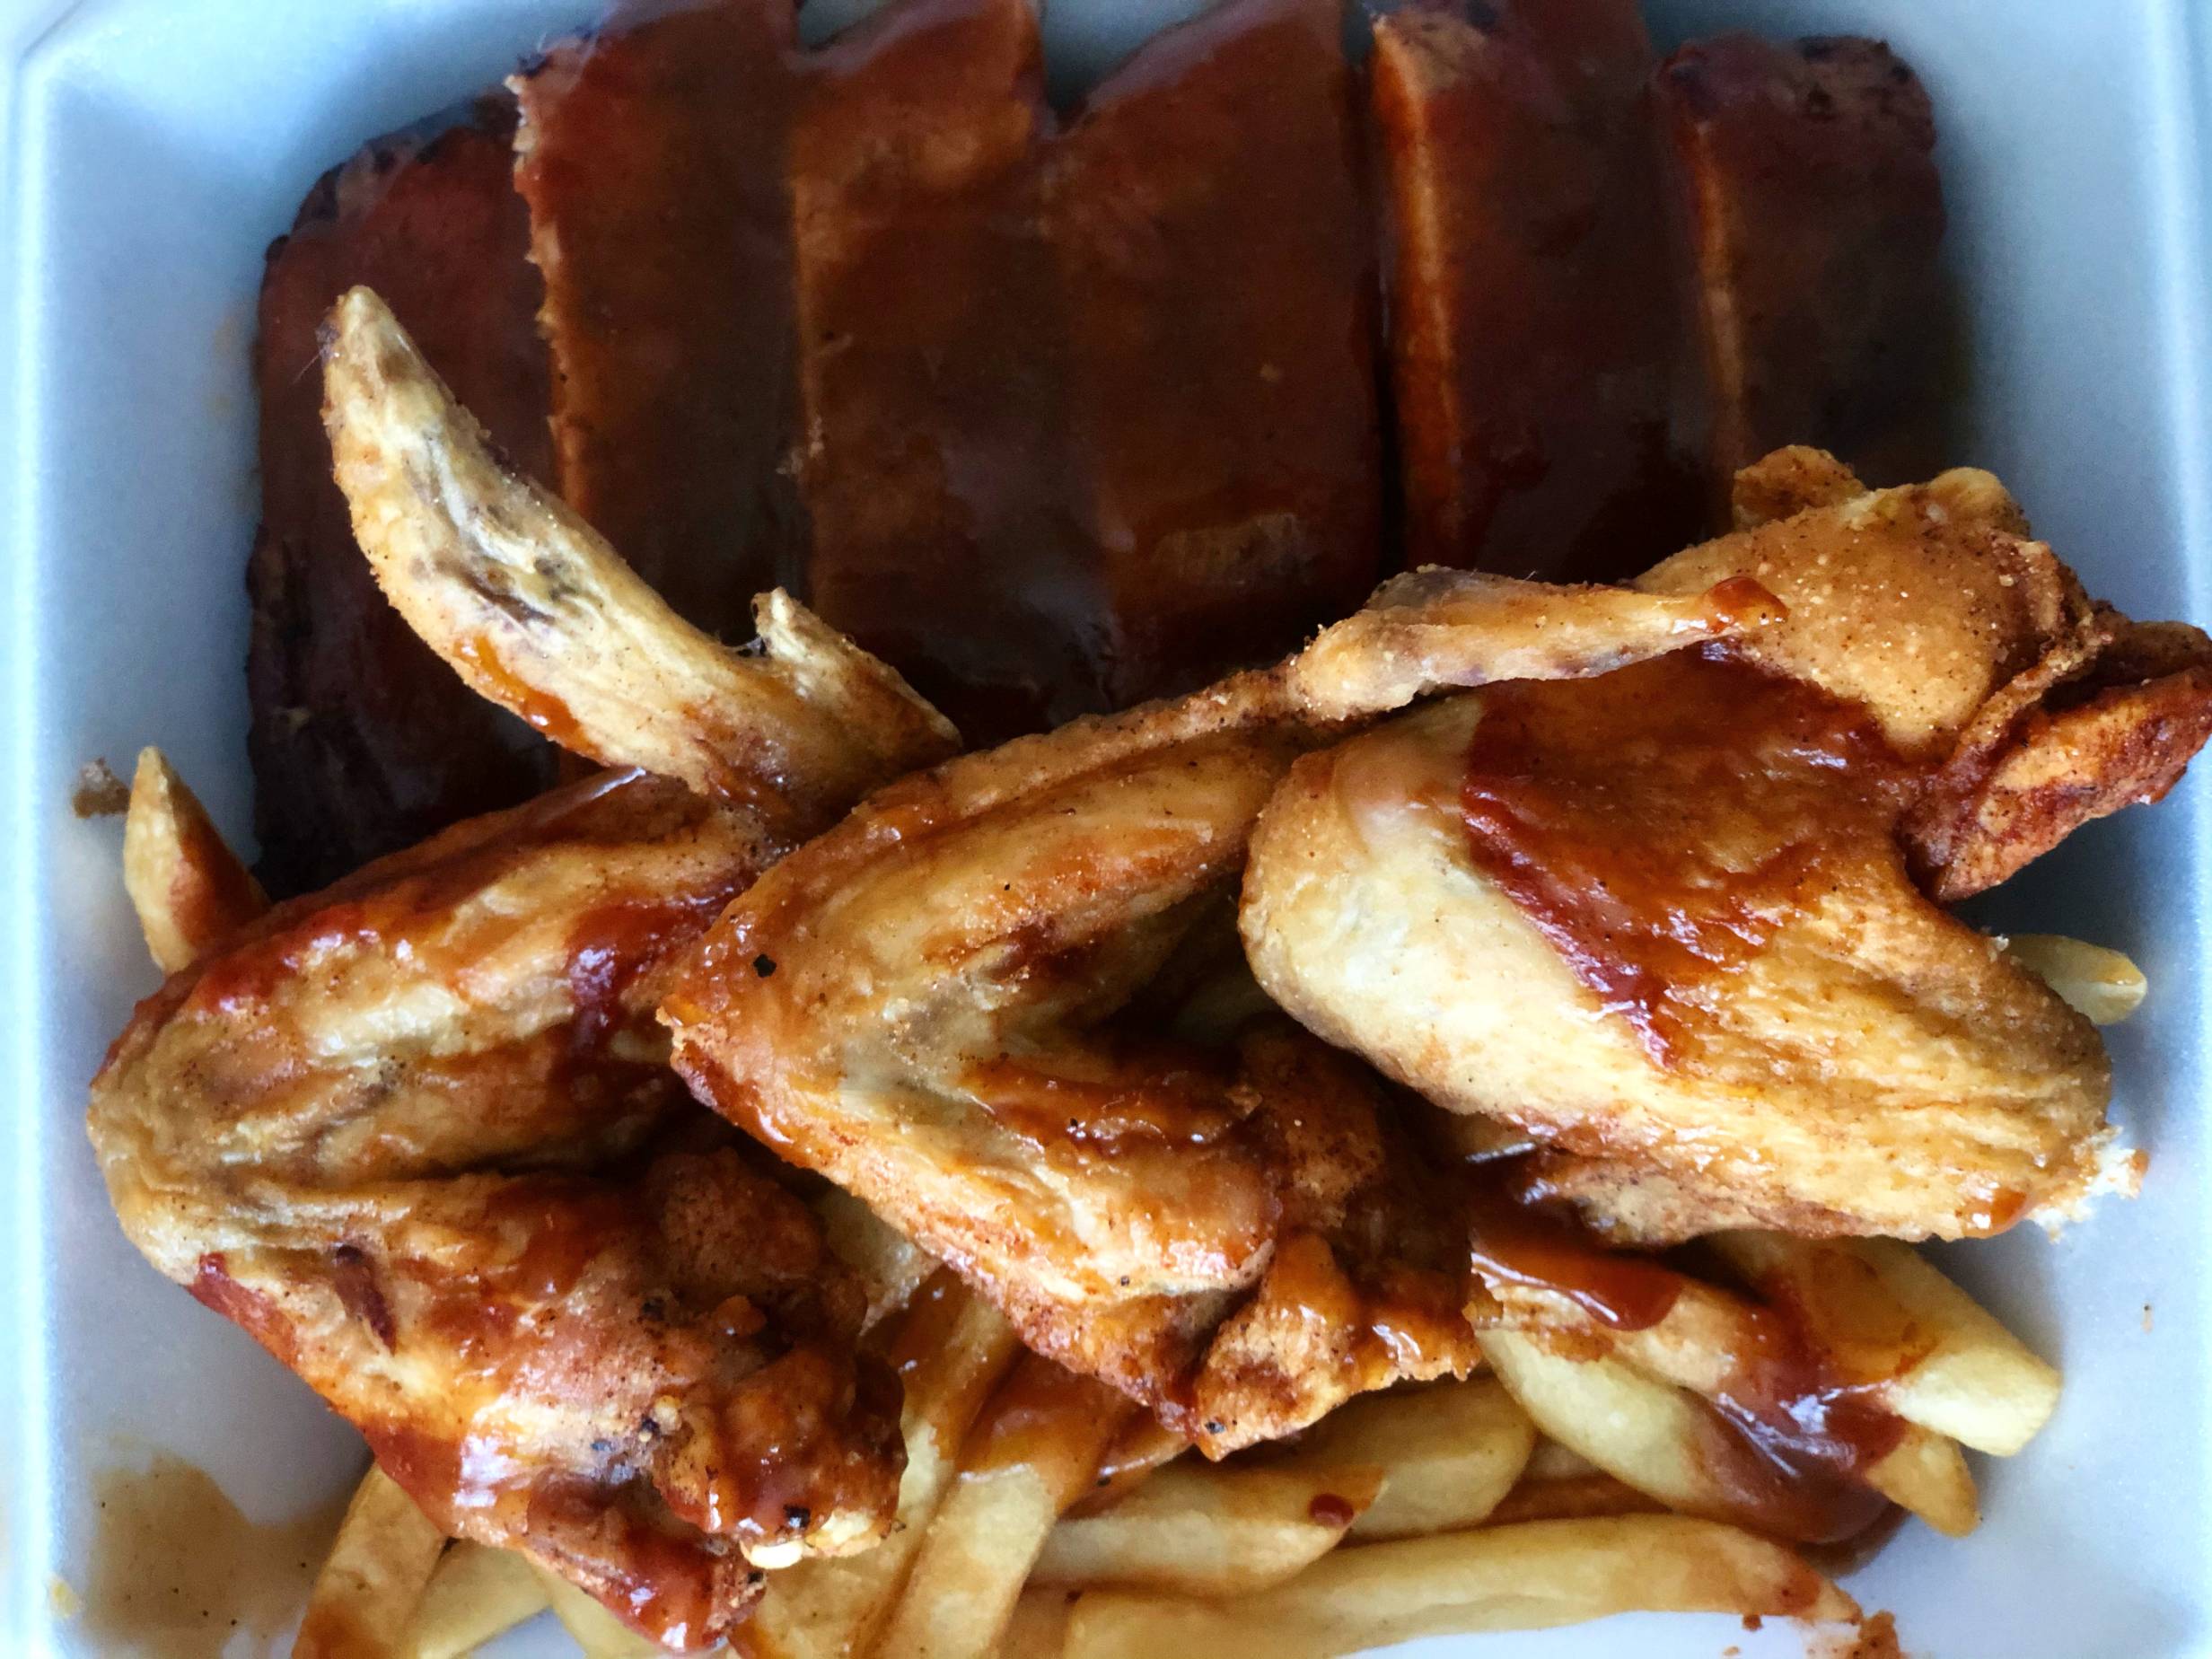 Three large wings lightly sauced sit on top of french fries in a styrofoam container next to ribs with sauce. Photo by Alyssa Buckley.